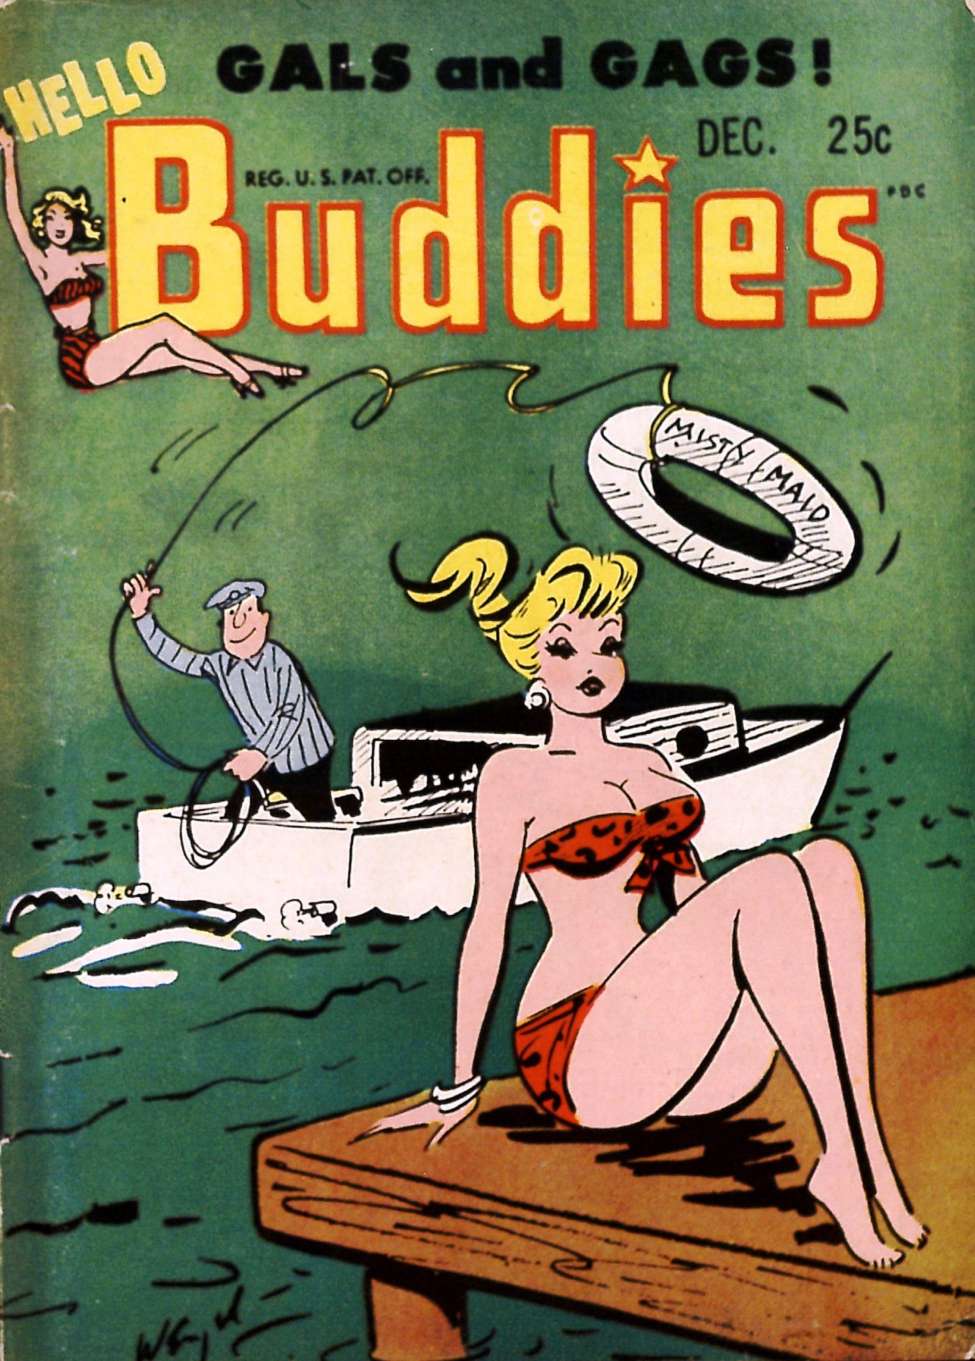 Book Cover For Hello Buddies 91